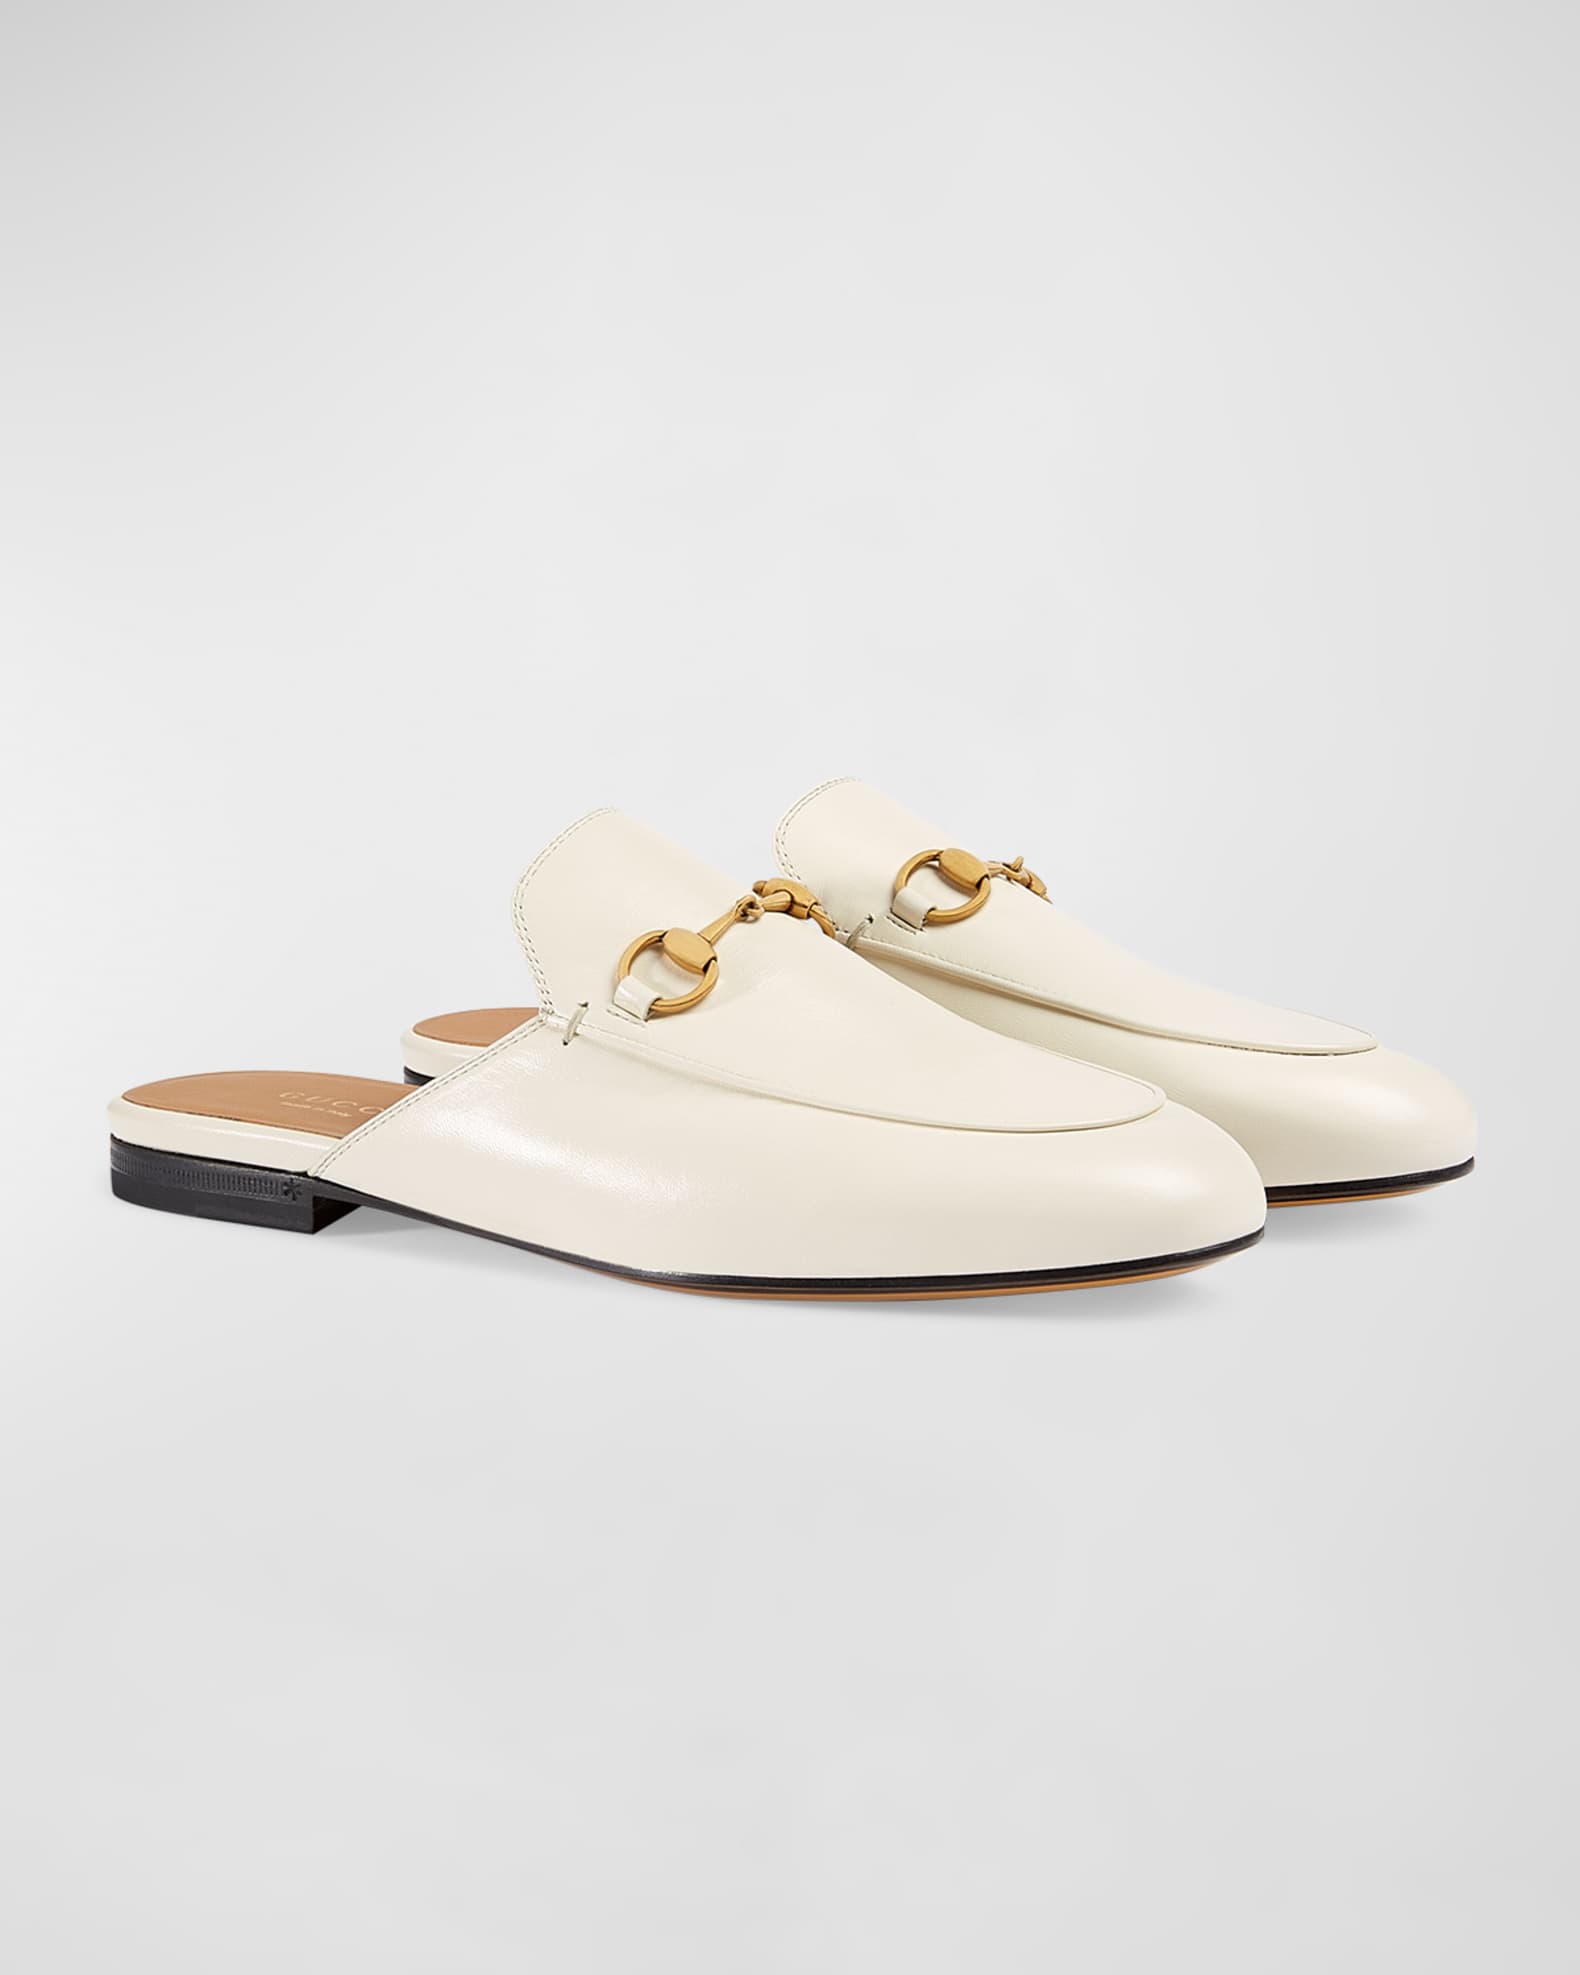 Gucci Leather Mules Neiman Marcus